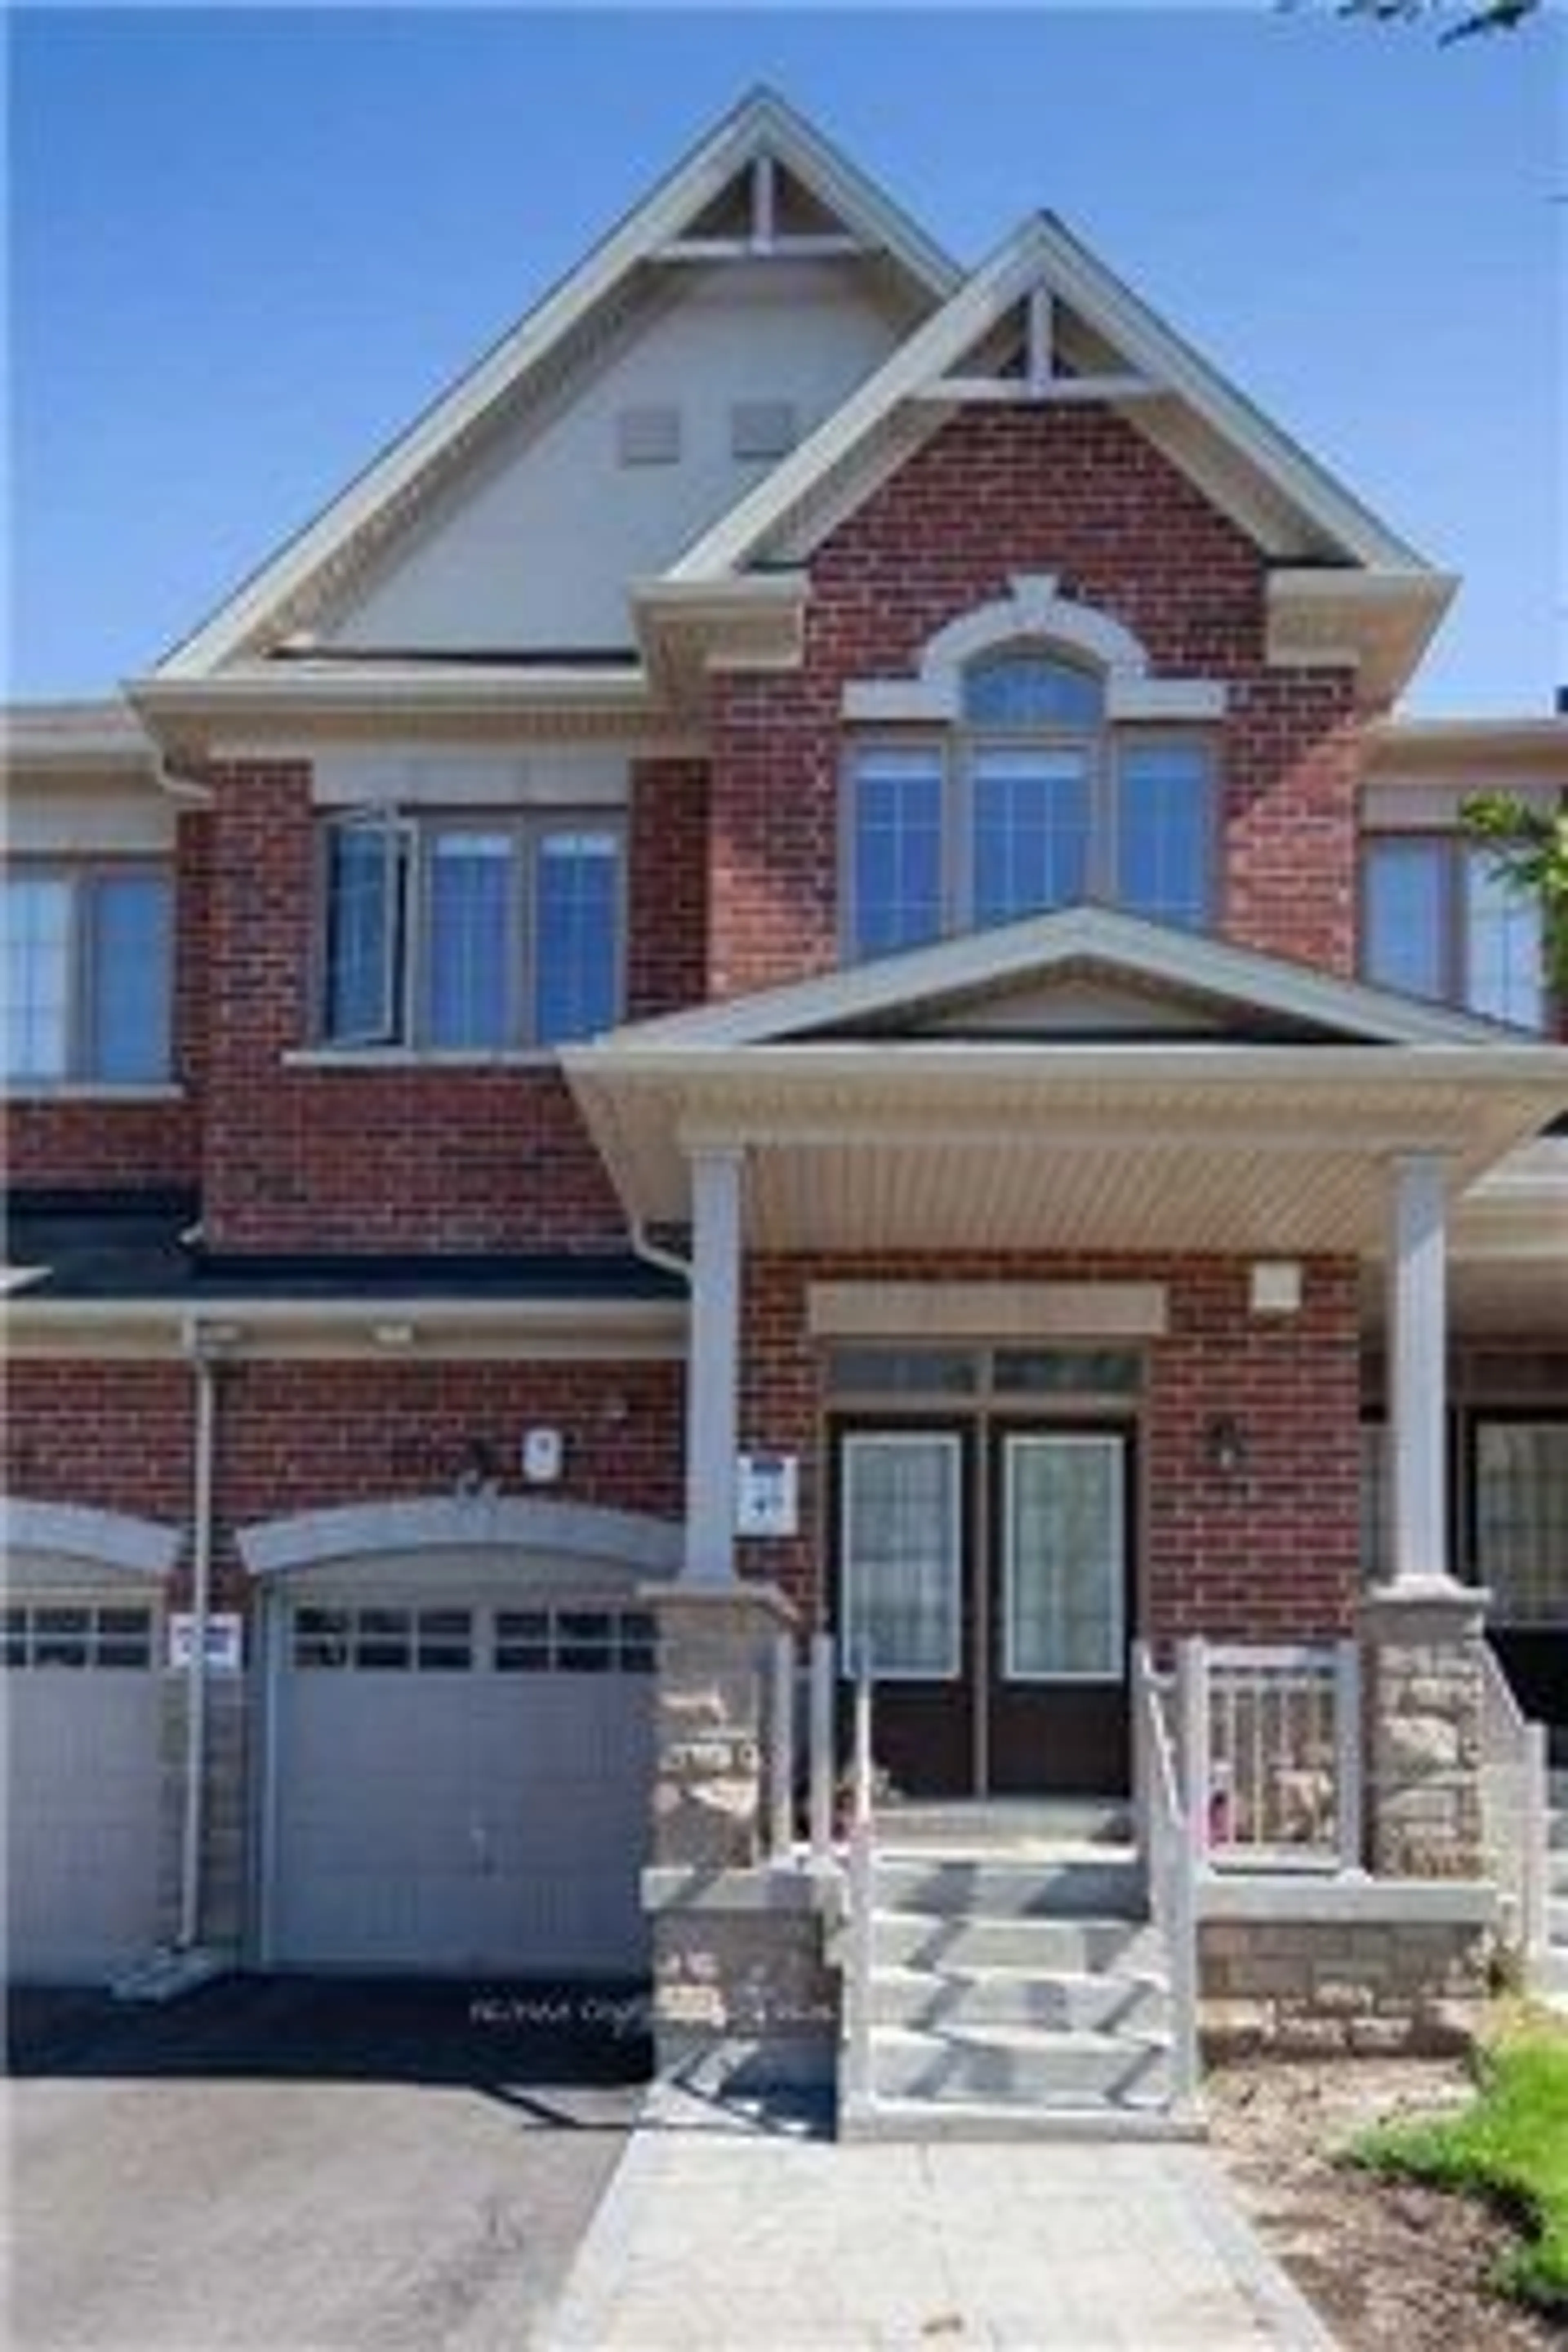 Home with brick exterior material for 120 Firwood Dr, Richmond Hill Ontario L4S 0E8